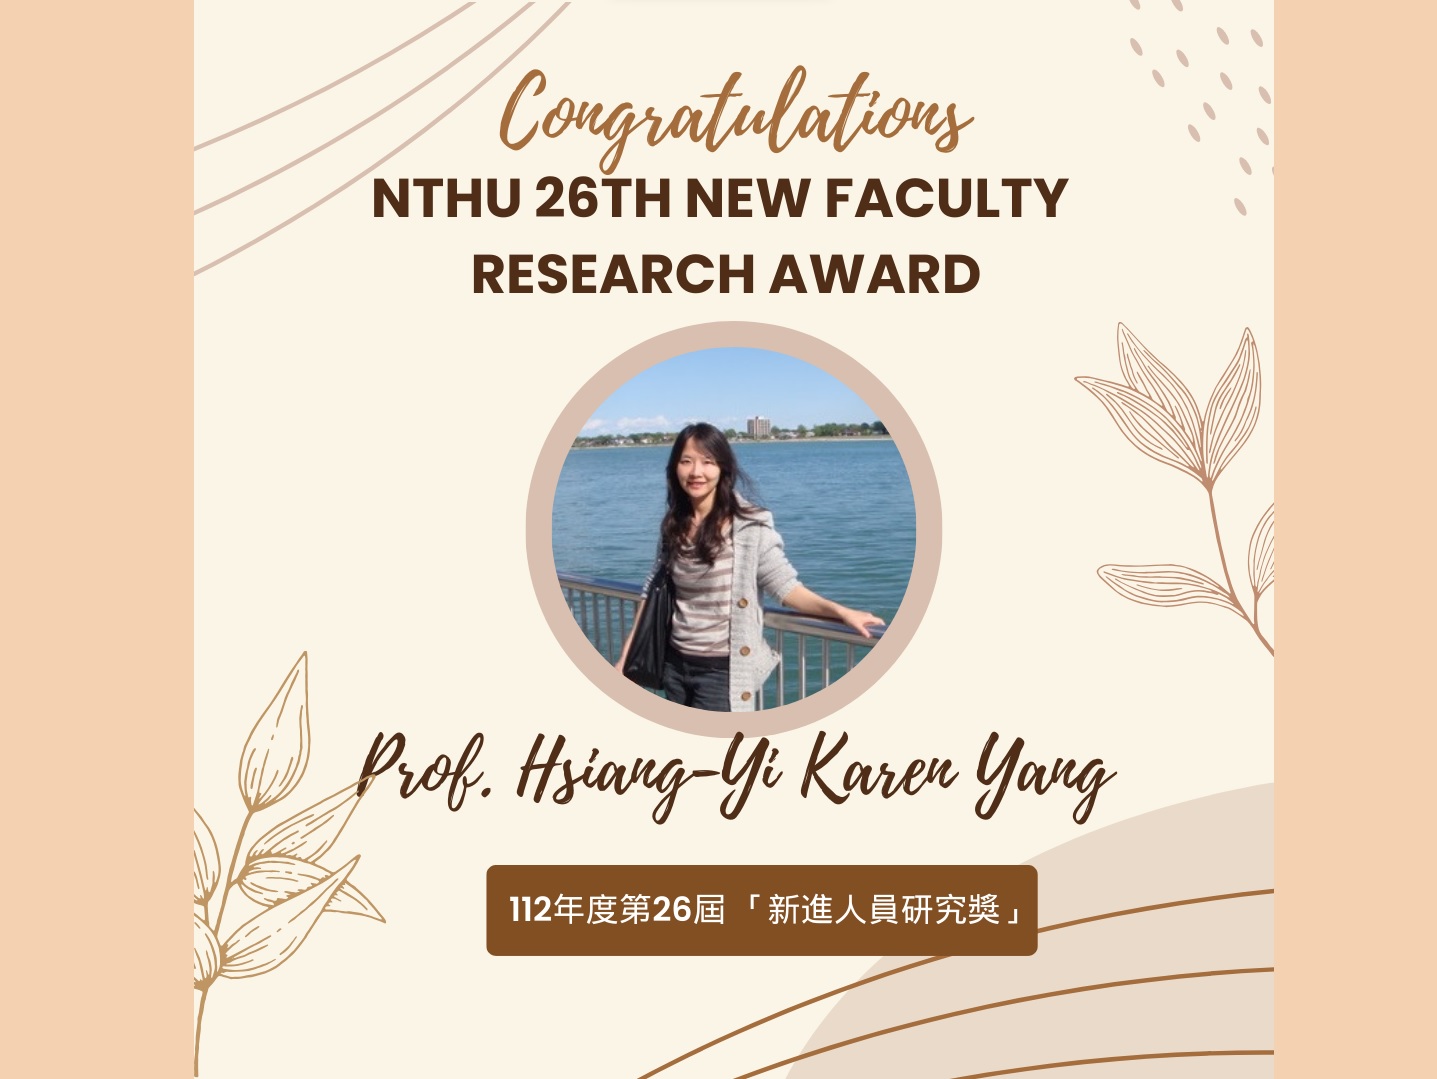 Assistant Professor Hsiang-Yi Karen Yang of Astronomy Institute wins NTHU 26th New Faculty Research Award